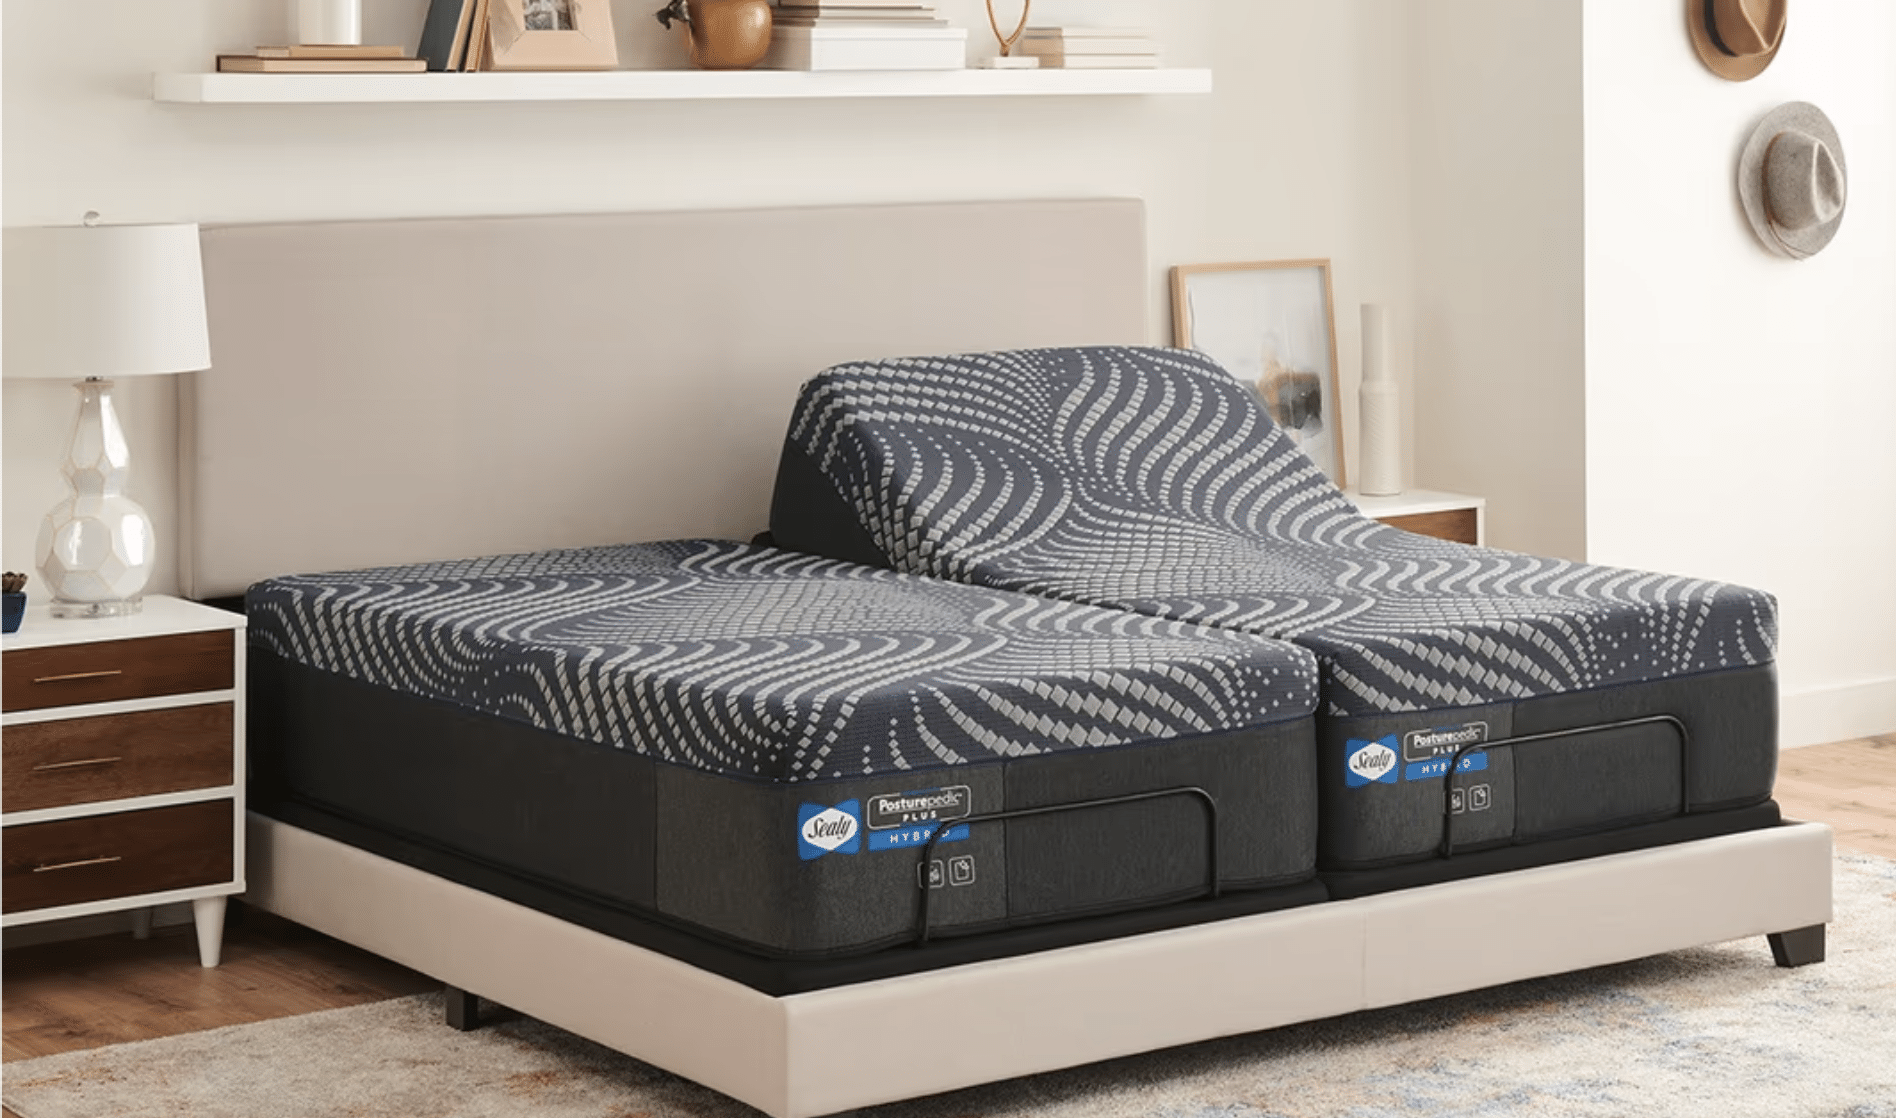 https://d2ozvnti1psmlp.cloudfront.net/wp-content/uploads/2023/07/Sealy-Adjustable-Bed-Image.png